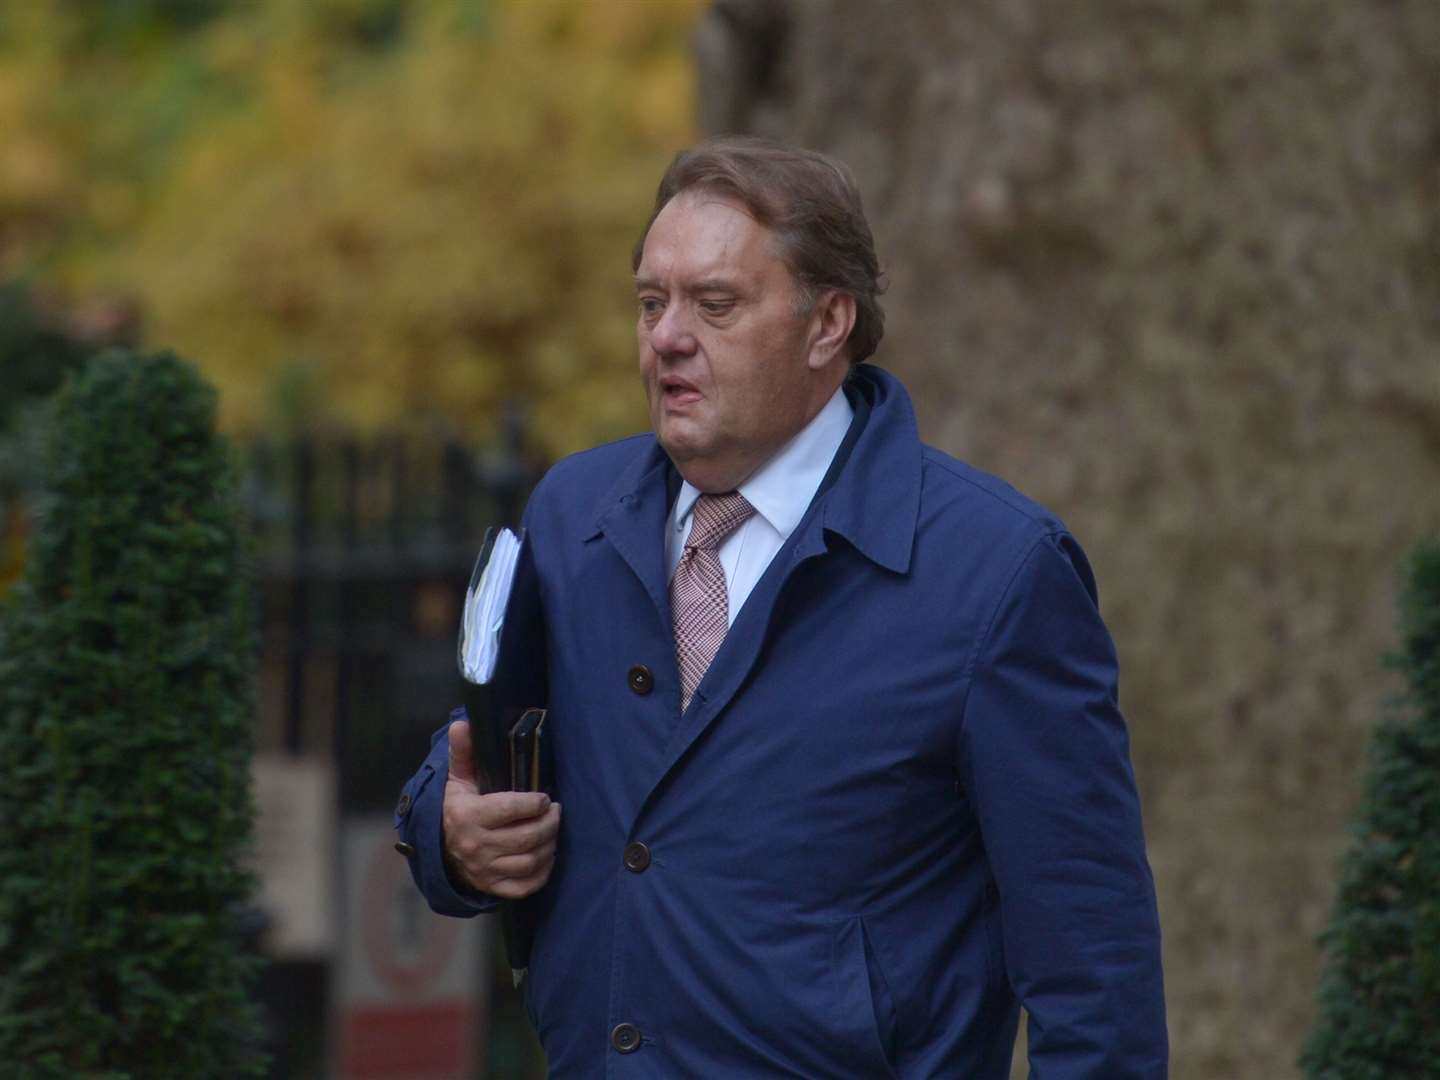 Suella Braverman left the Home Office after she was found to have leaked confidential cabinet papers to Sir John Hayes, but she was brought back days later by Rishi Sunak (Nick Ansell/PA)